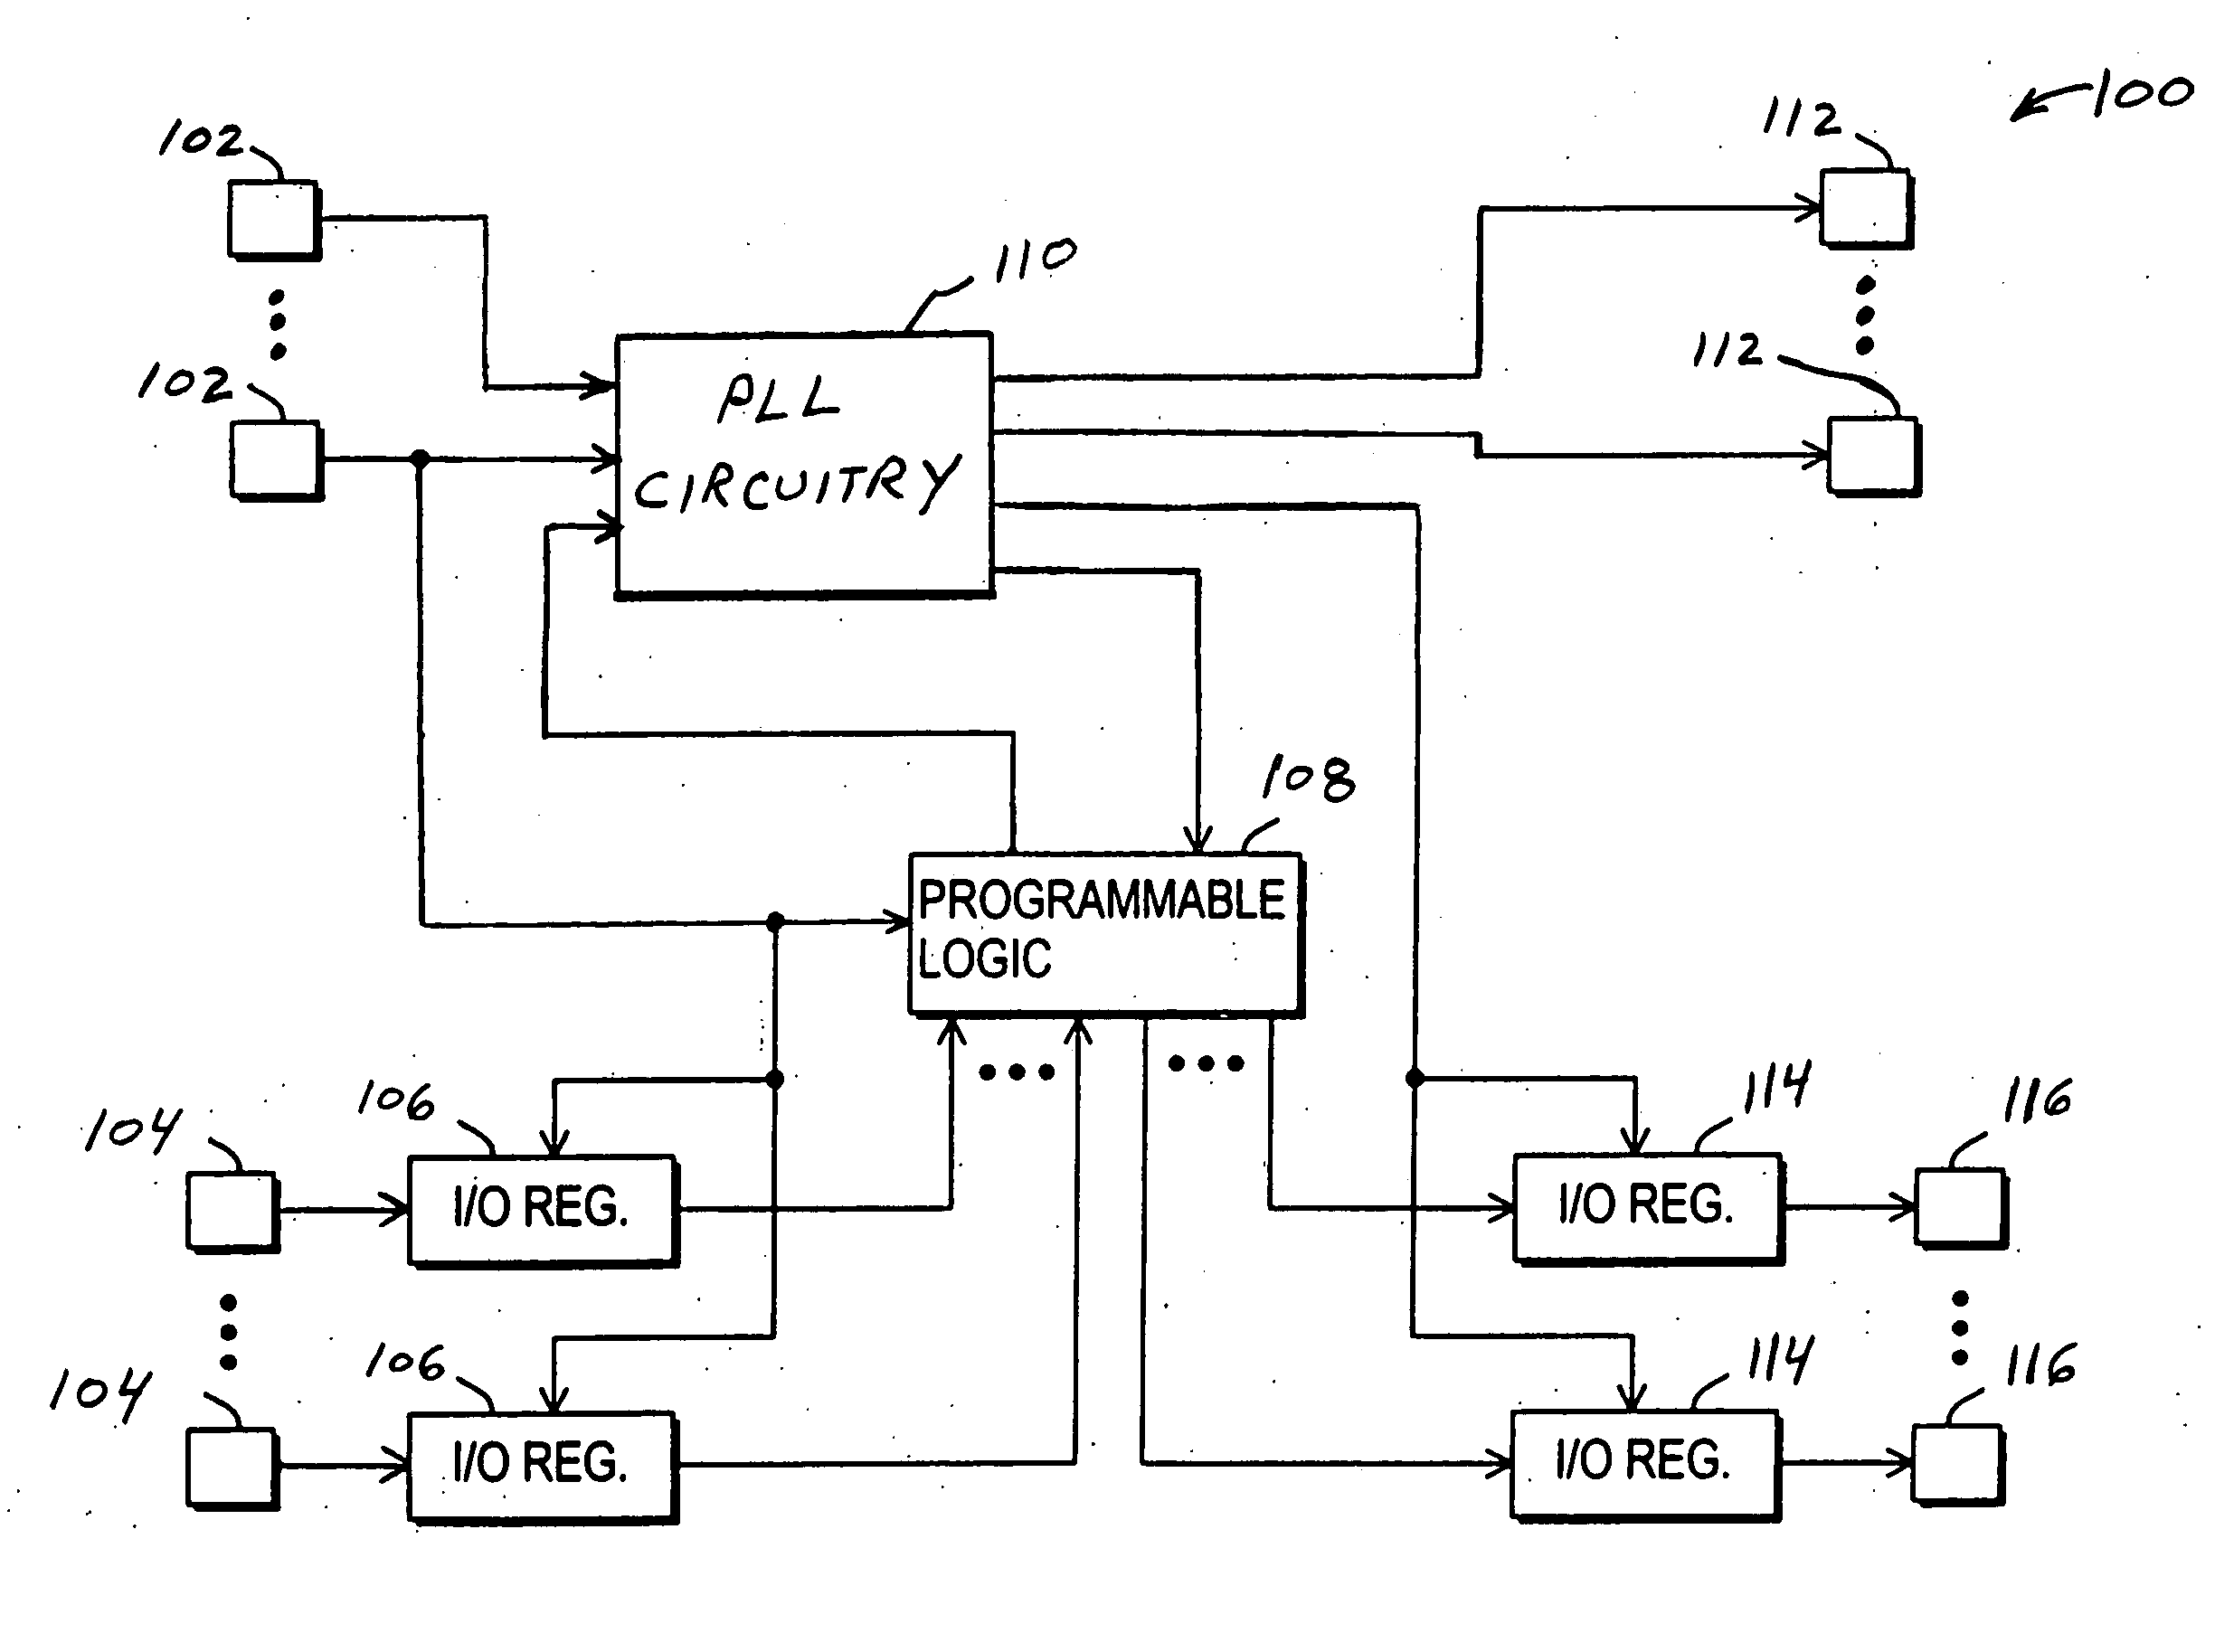 Highly configurable PLL architecture for programmable logic